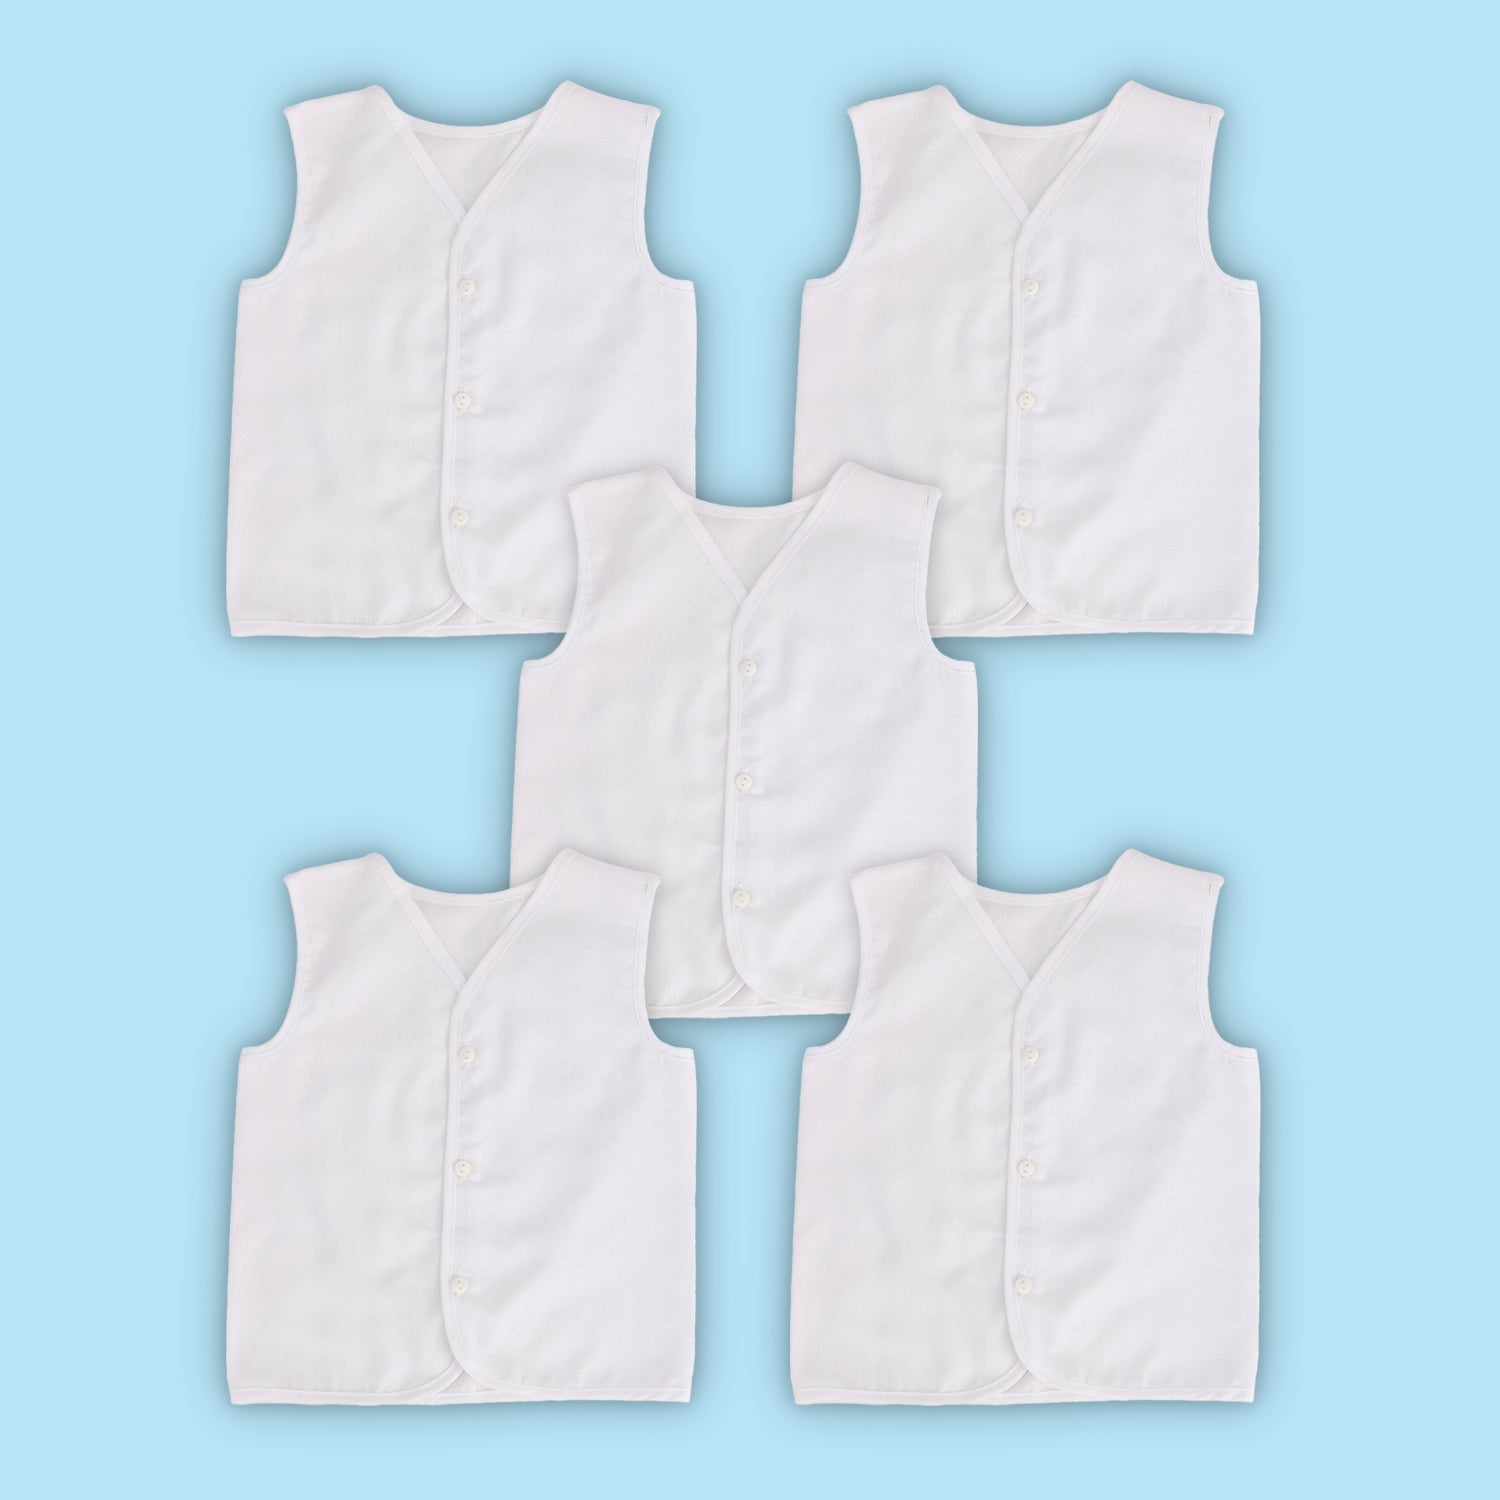 Baby Moo Solid V-Neck Sleeveless Front Opening Button Cotton Jhablas 5 Pcs - White